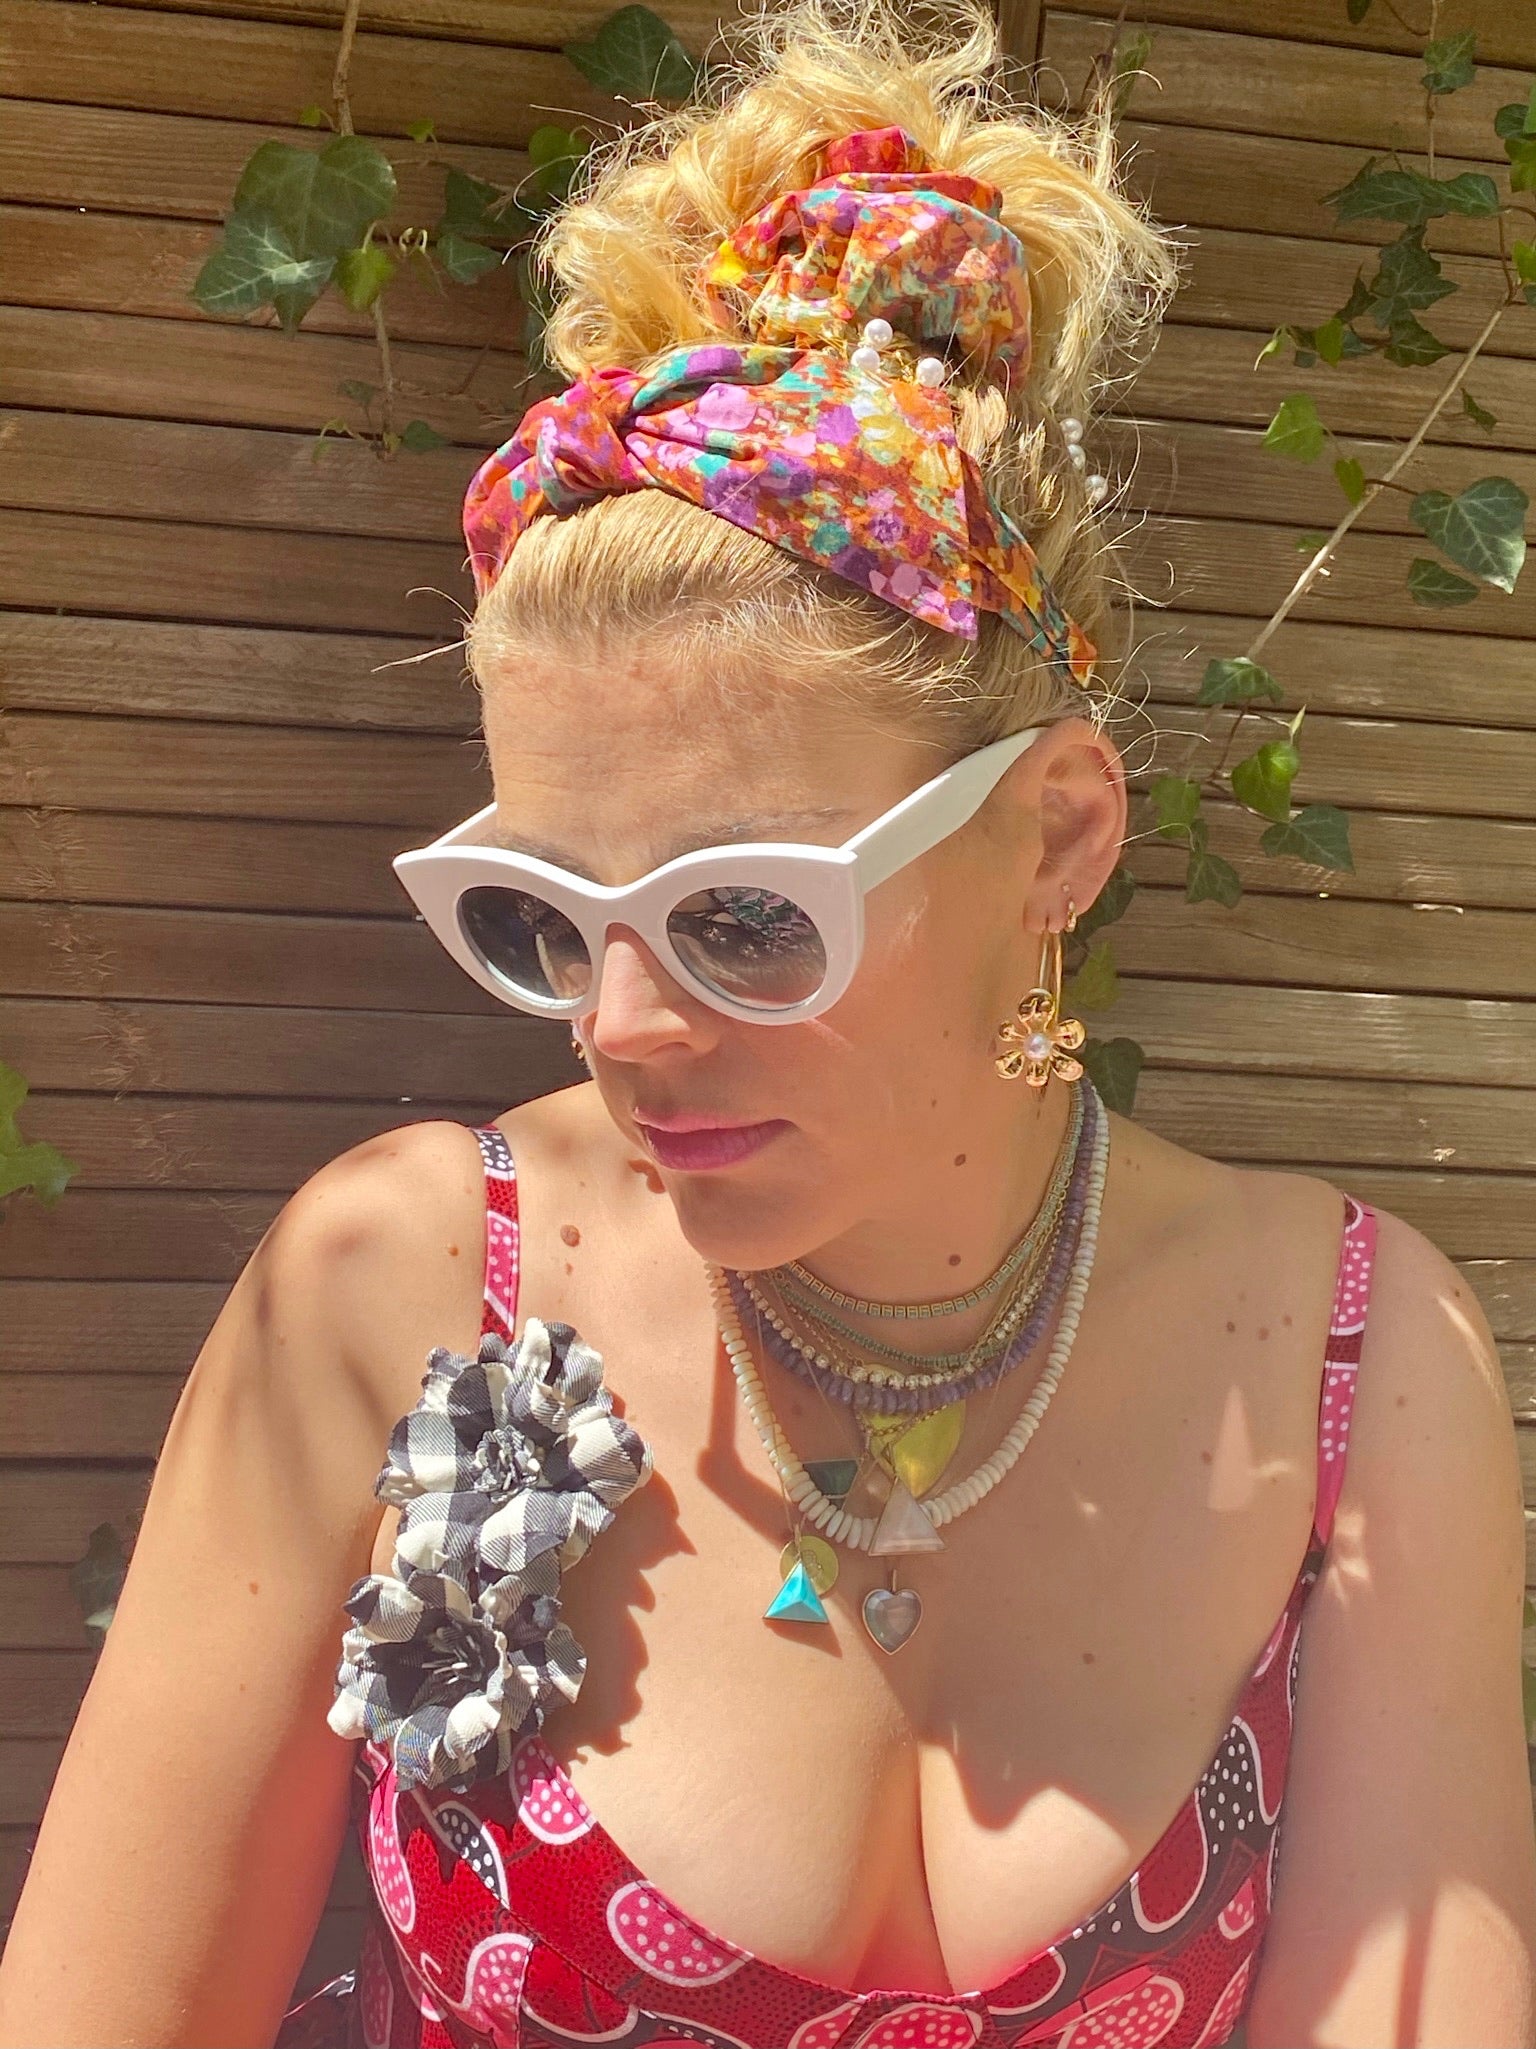 Lapel Flower in B/W Check: The Flower Power Collection x Busy Philipps